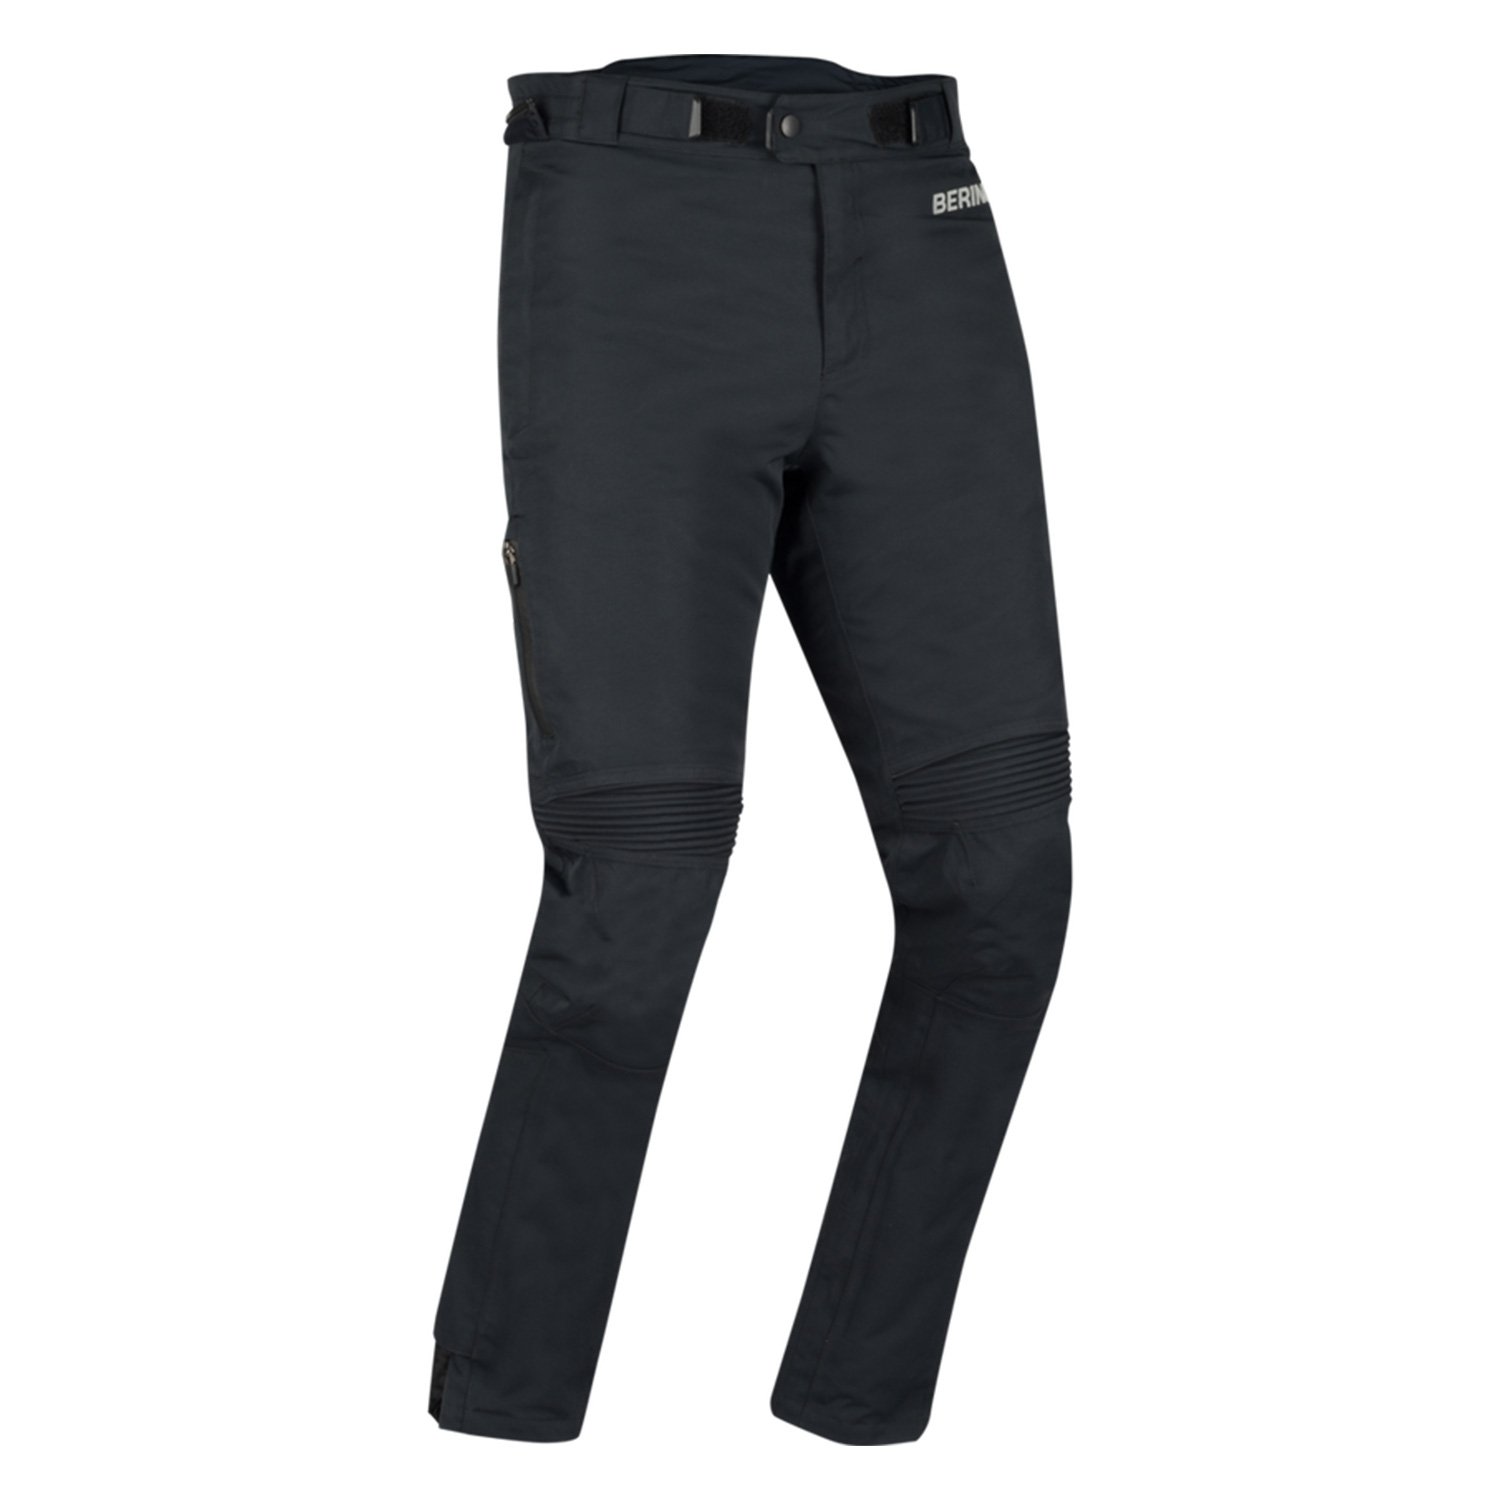 Image of Bering Zephyr Trousers Black Taille 2XL